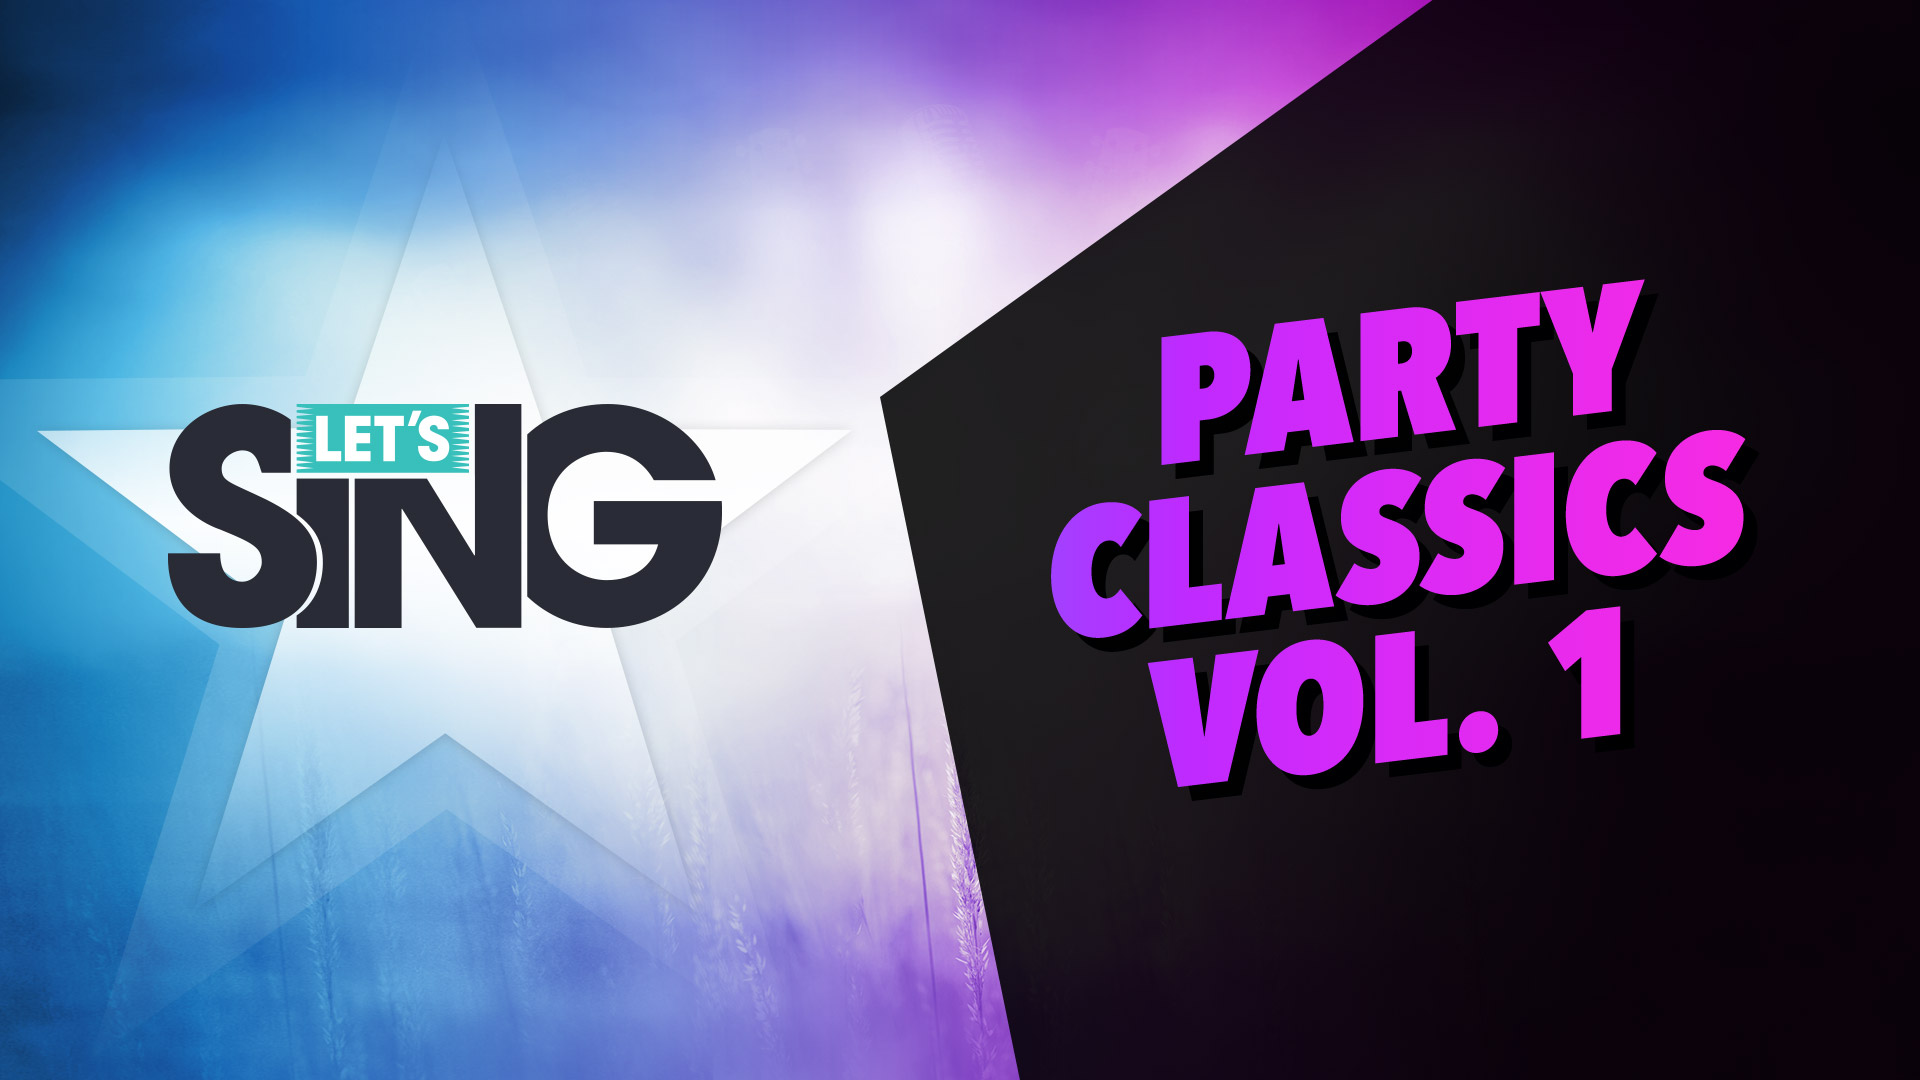 Let's Sing - Party Classics Vol. 1 Song Pack